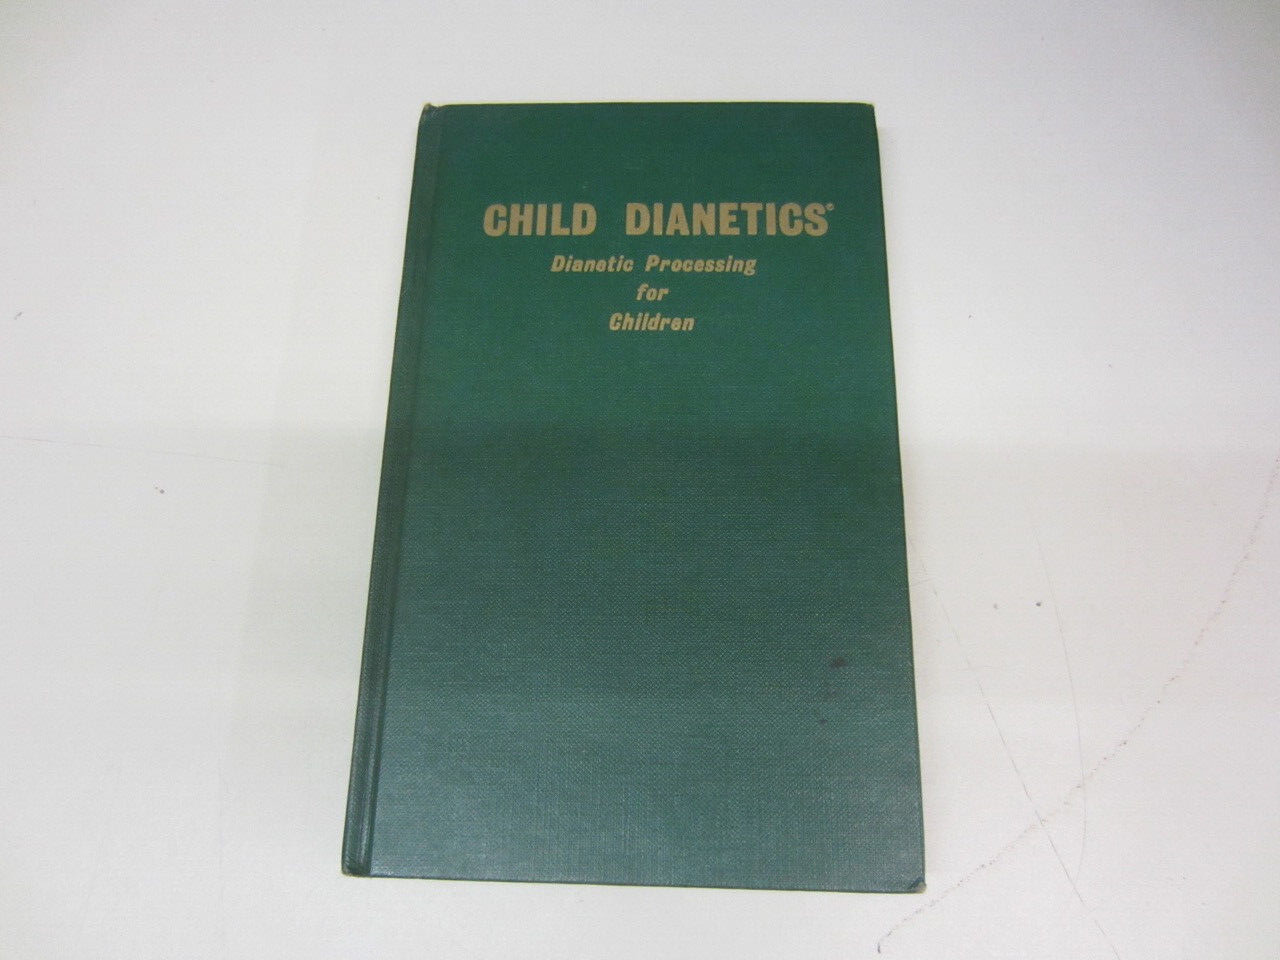 1974 CHILD DIANETICS Dianetic Processing For Children L. Ron Hubbard Hardcover